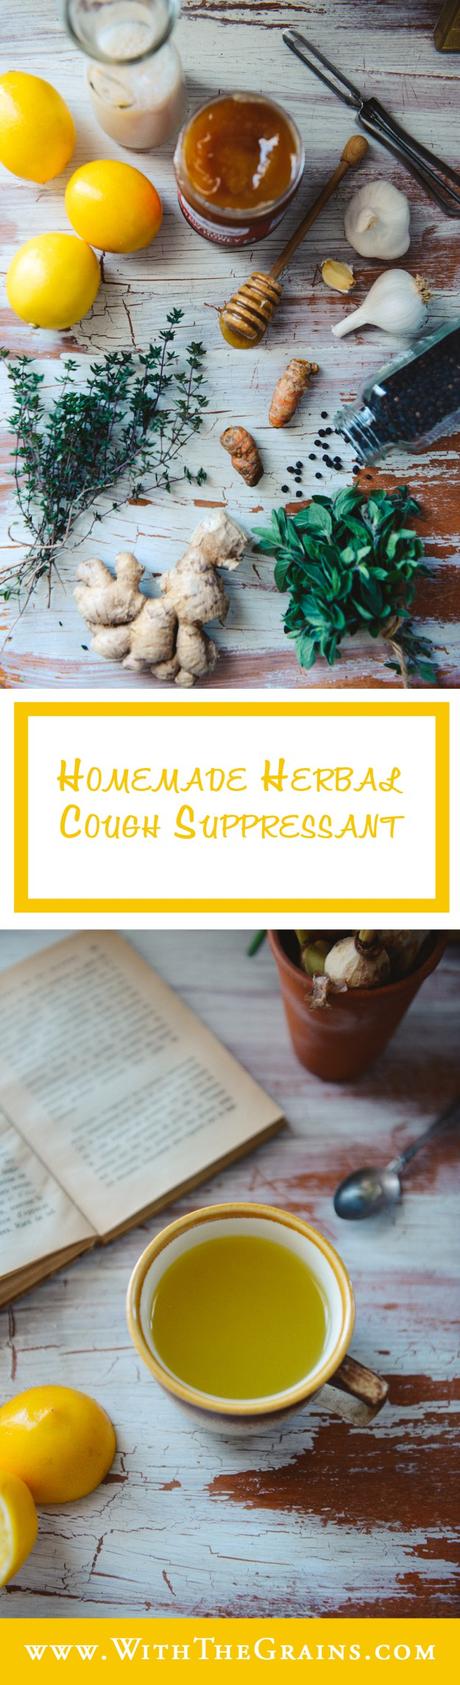 Herbal Cough Suppressant by With The Grains